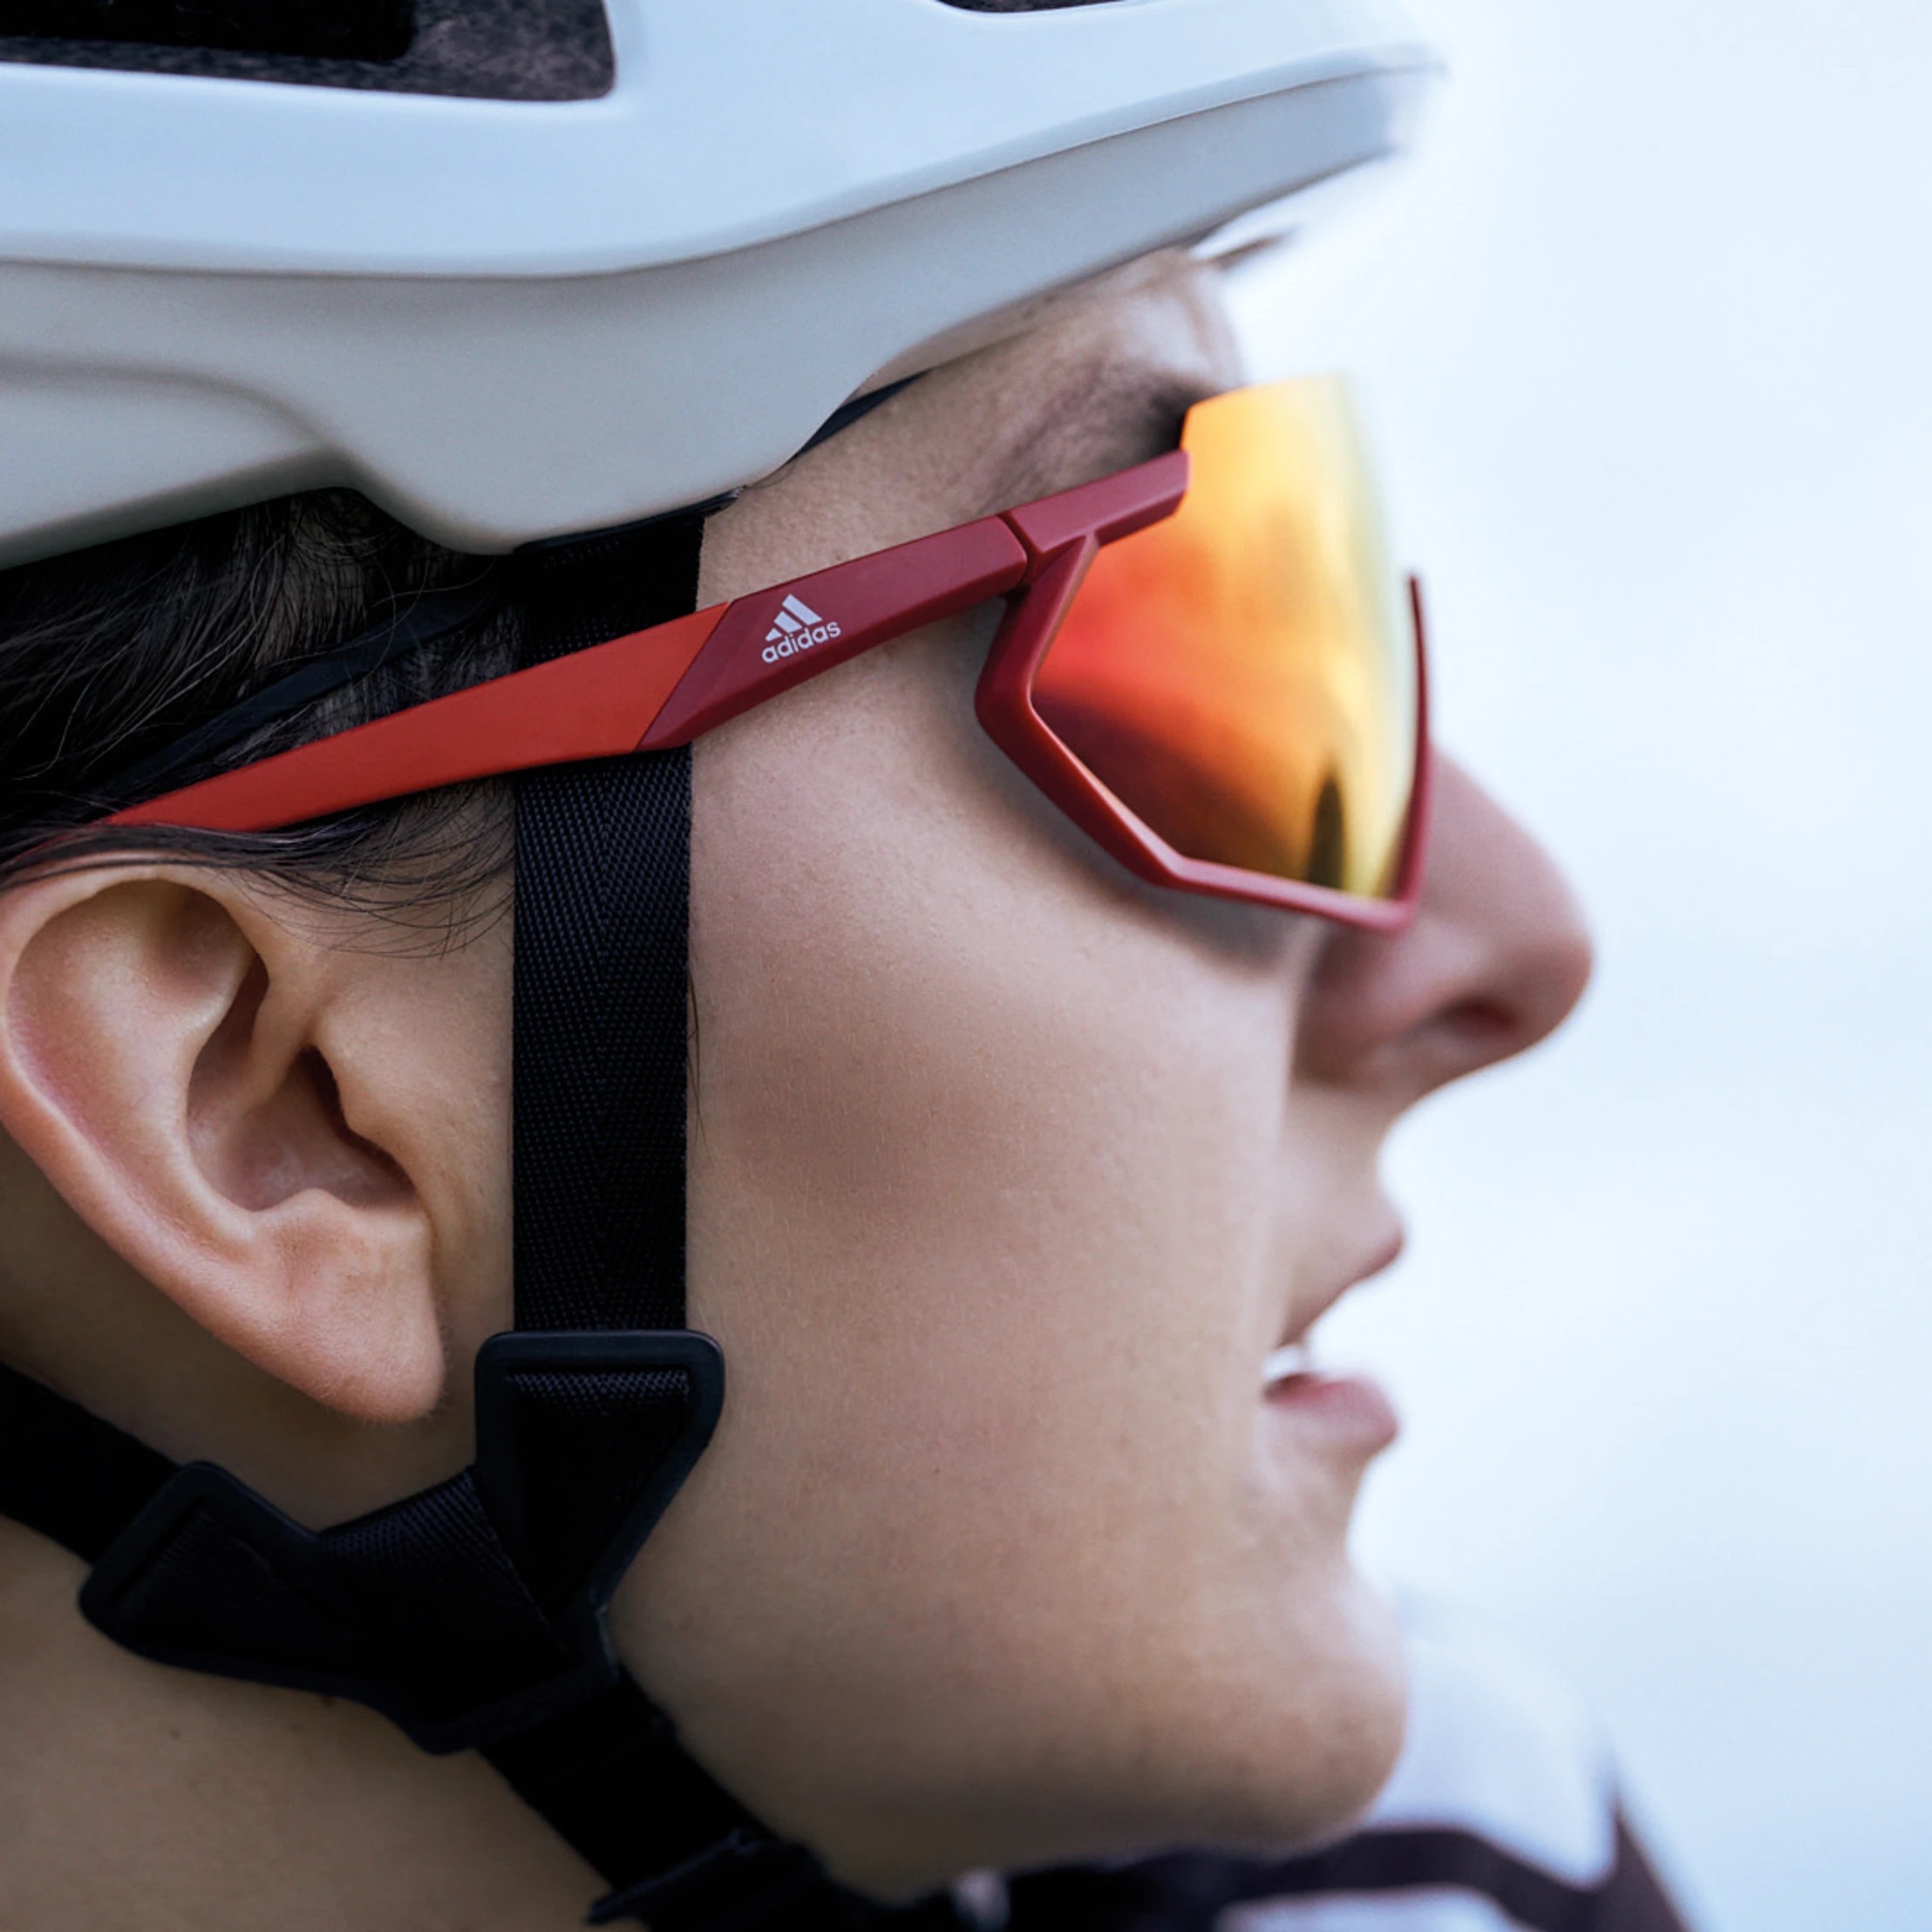 Gelovige Ongemak seinpaal Roundup: New cycling sunglasses from Adidas, KOO and 100% are ready to ride  - Bikerumor